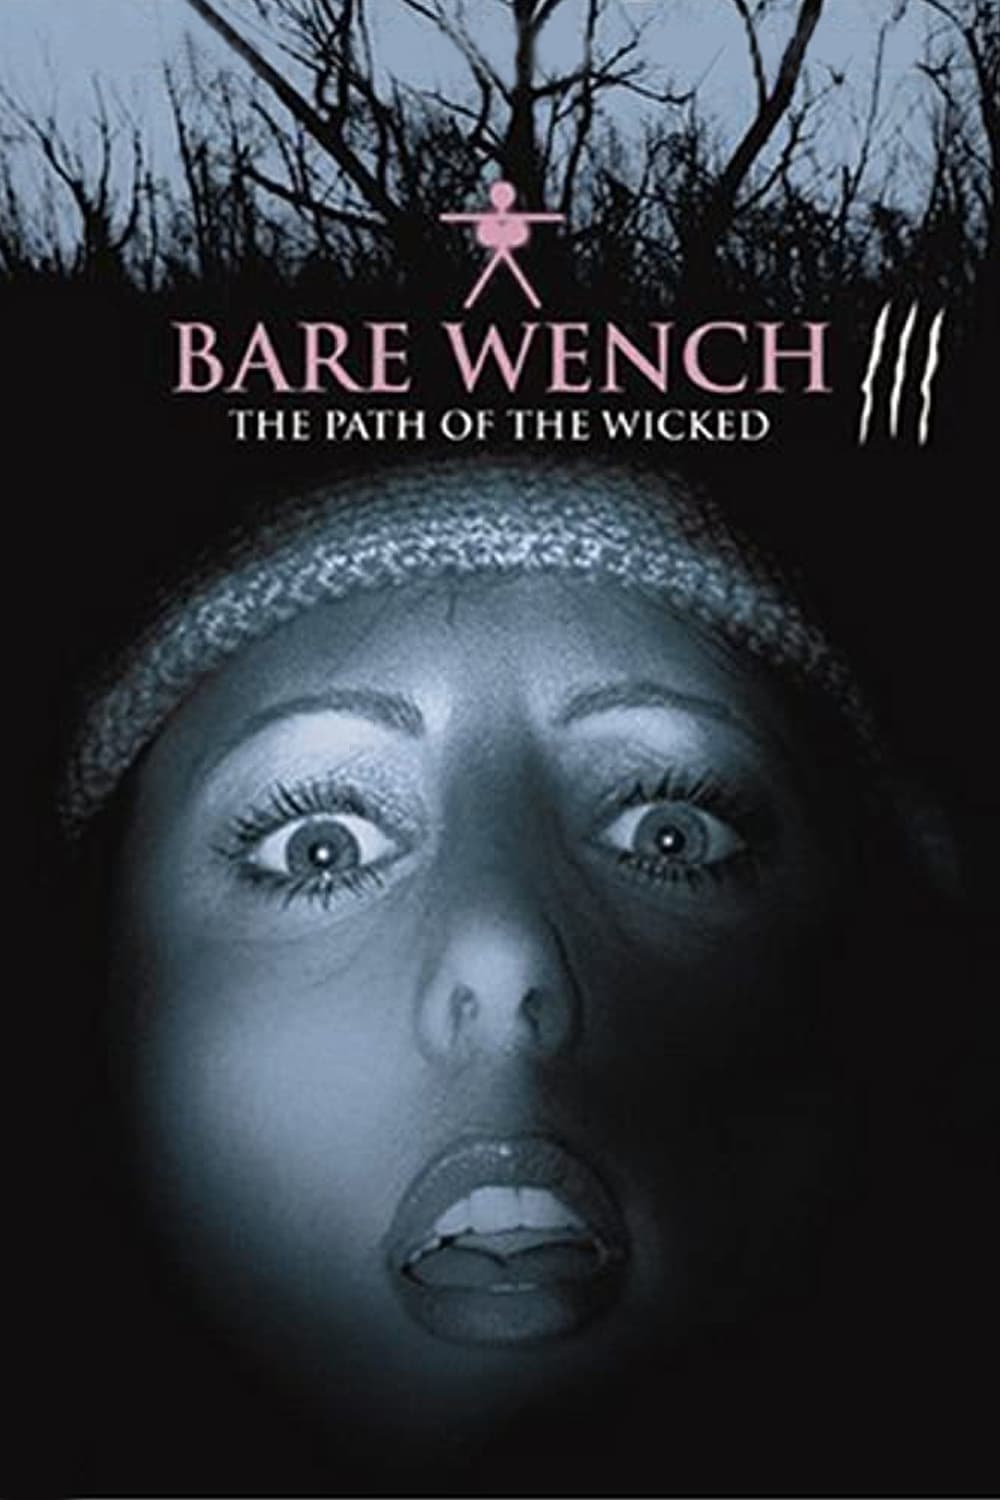 The Bare Wench Project 3: Nymphs of Mystery Mountain